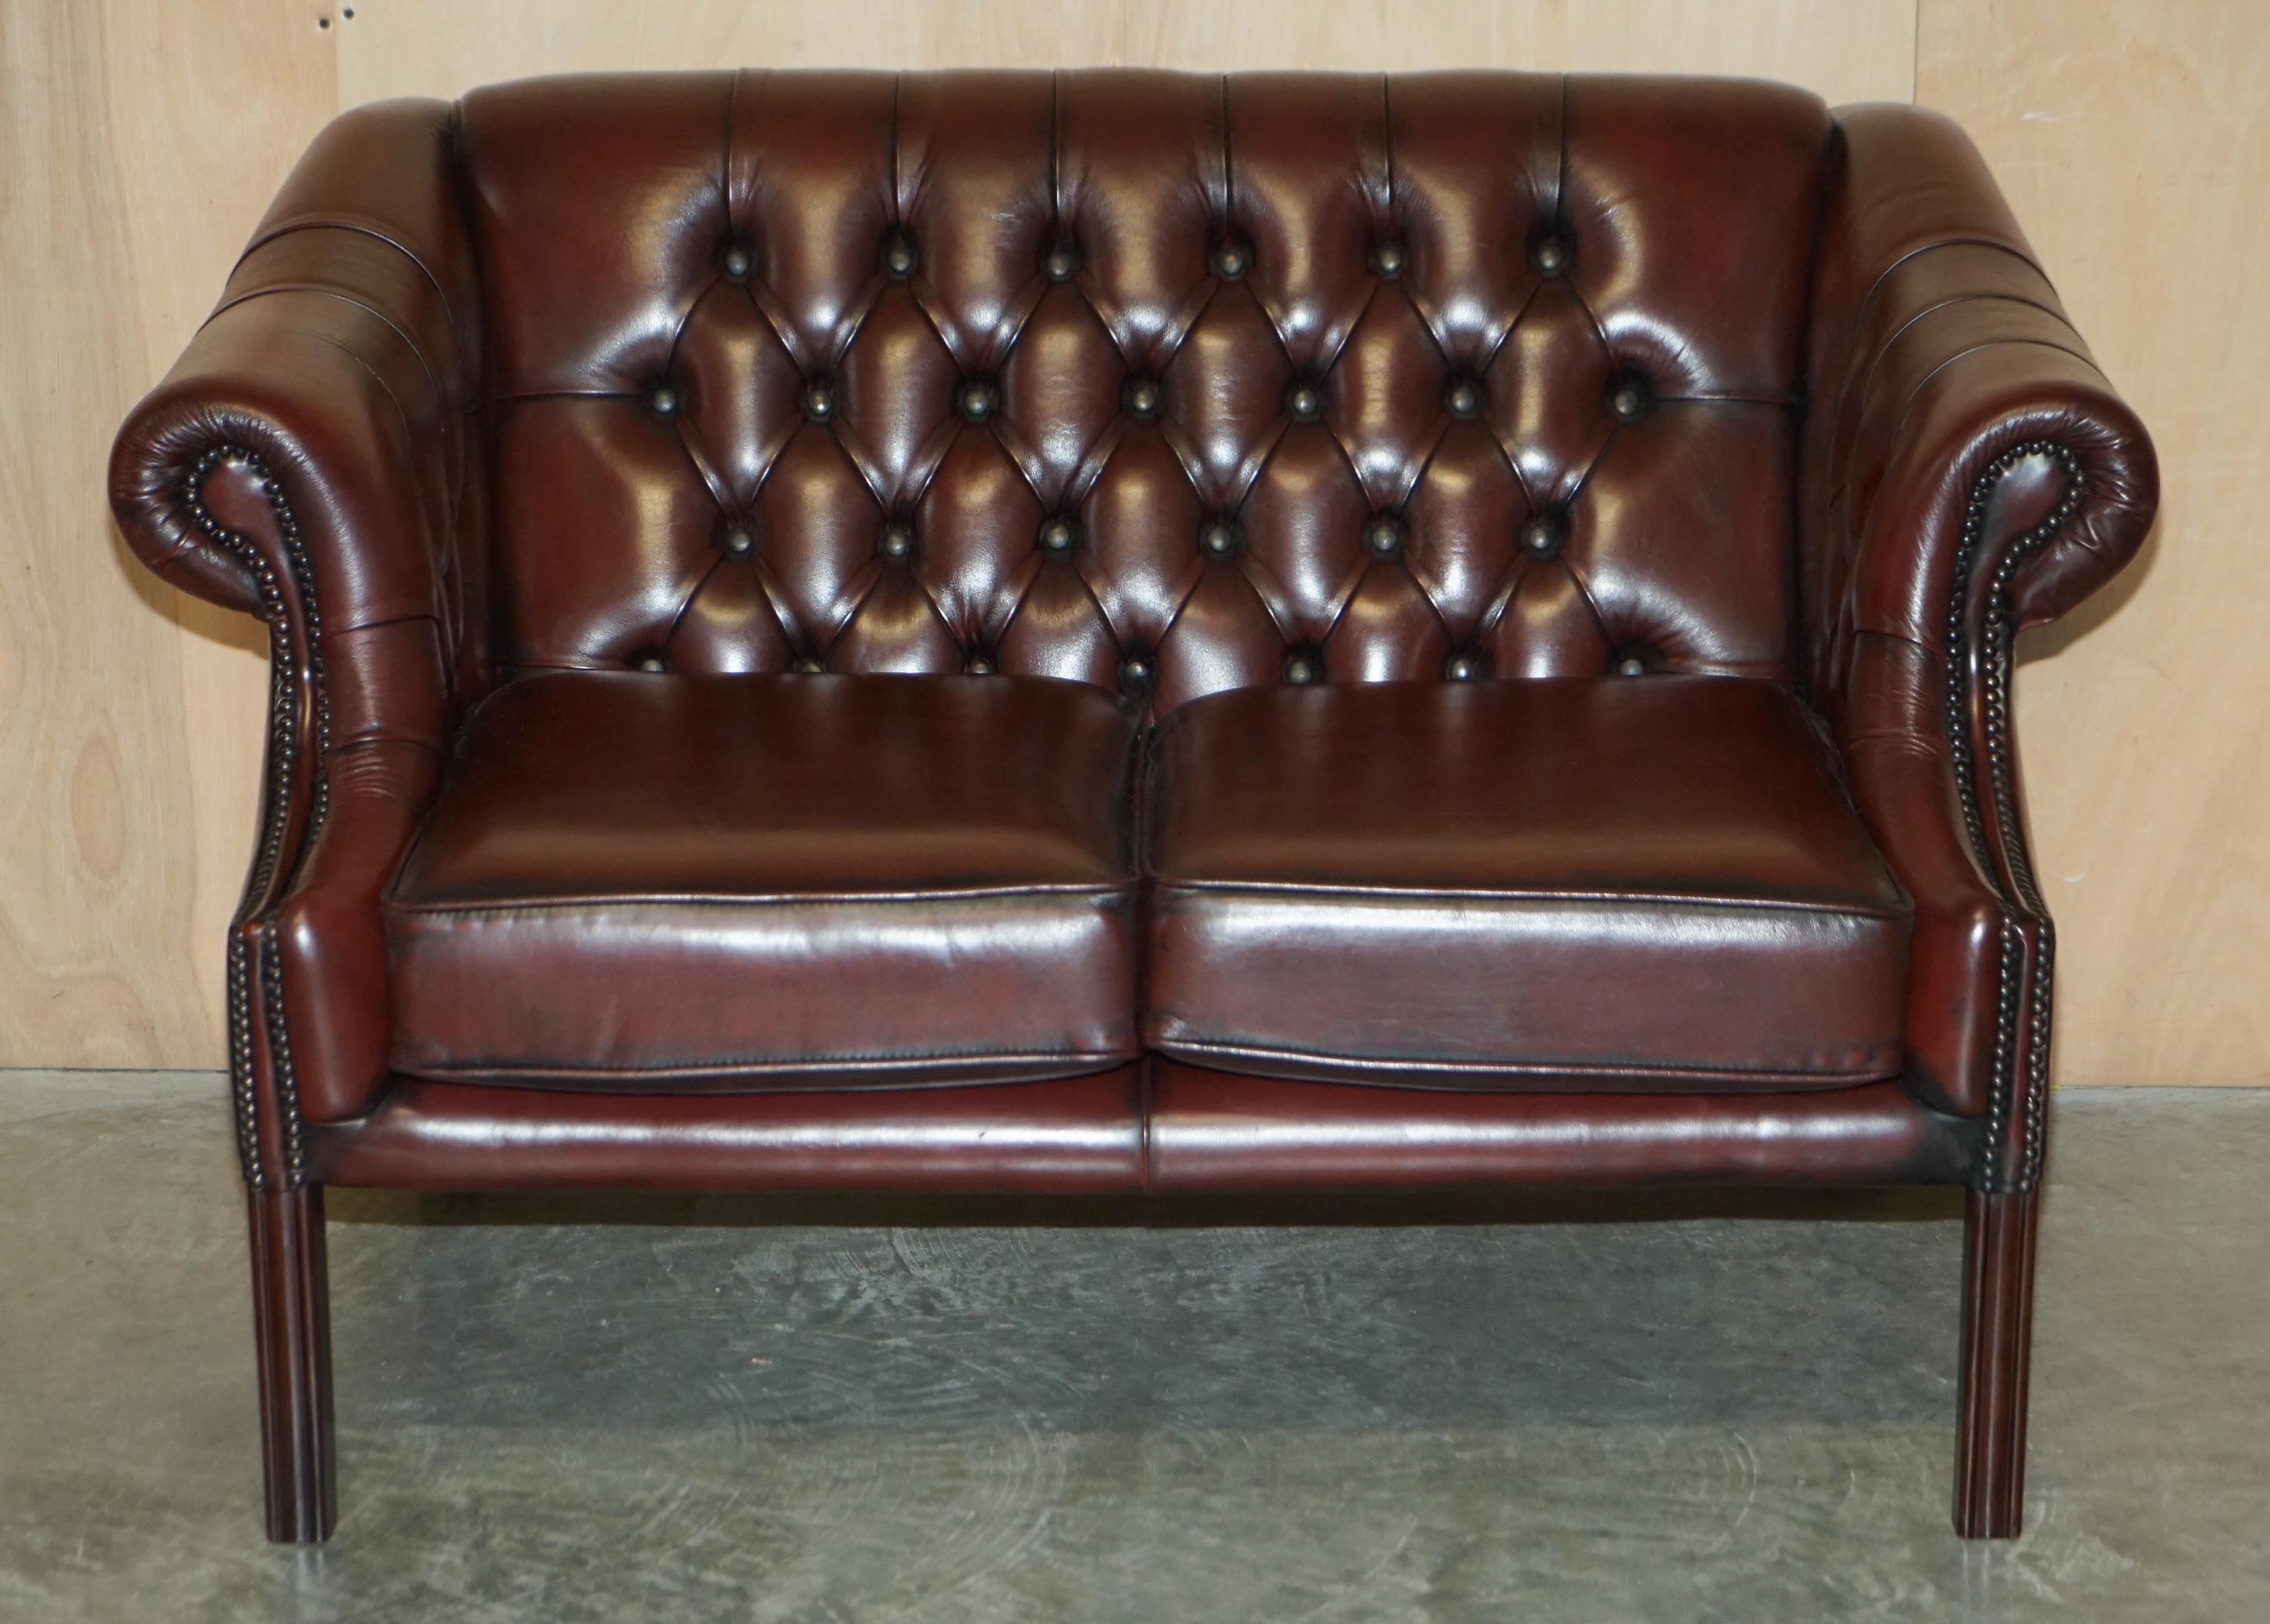 Pair of Harrods London Restored Bordeaux Brown Leather Chesterfield Tufted Sofas For Sale 14